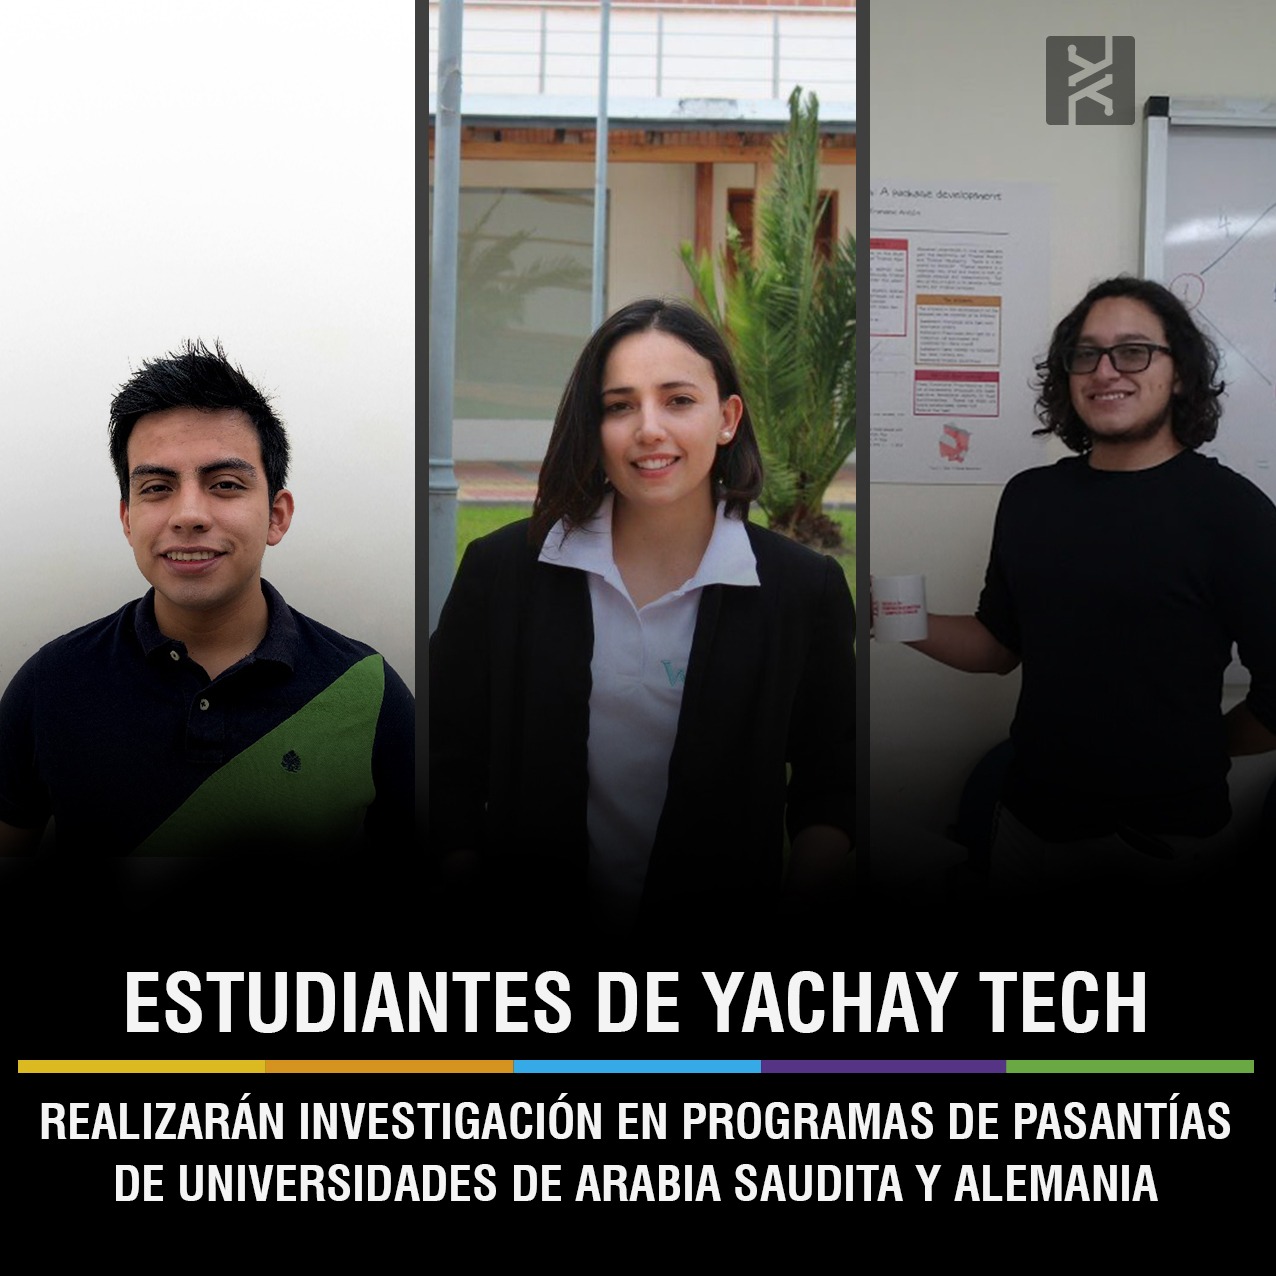 YACHAY TECH STUDENTS WILL CONDUCT RESEARCH IN INTERNSHIP PROGRAMS AT UNIVERSITIES IN SAUDI ARABIA AND GERMANY